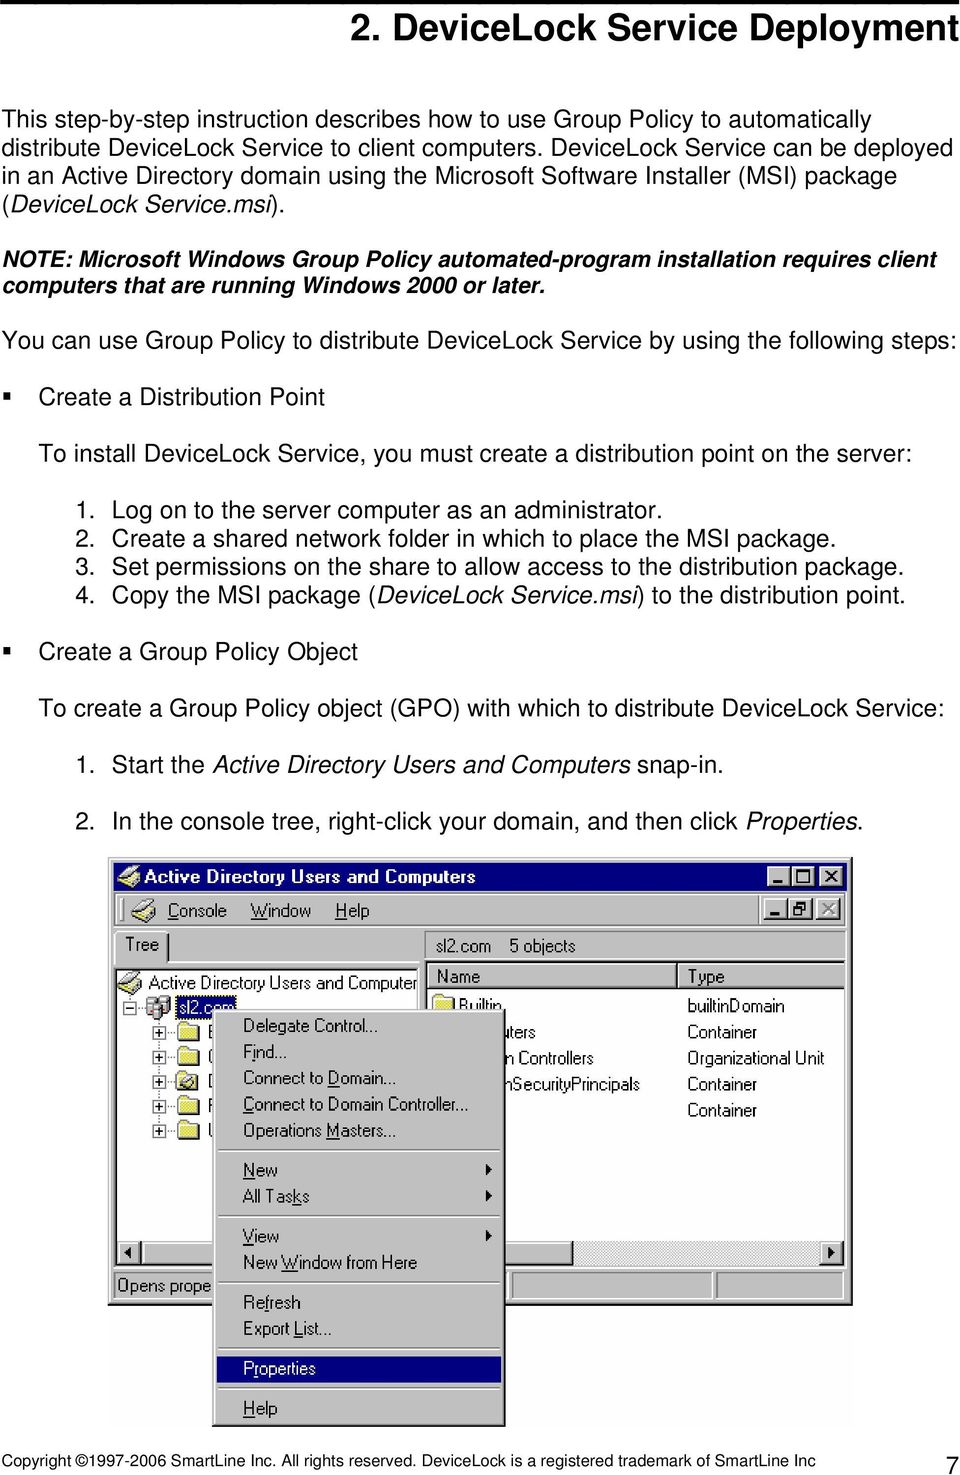 NOTE: Microsoft Windows Group Policy automated-program installation requires client computers that are running Windows 2000 or later.